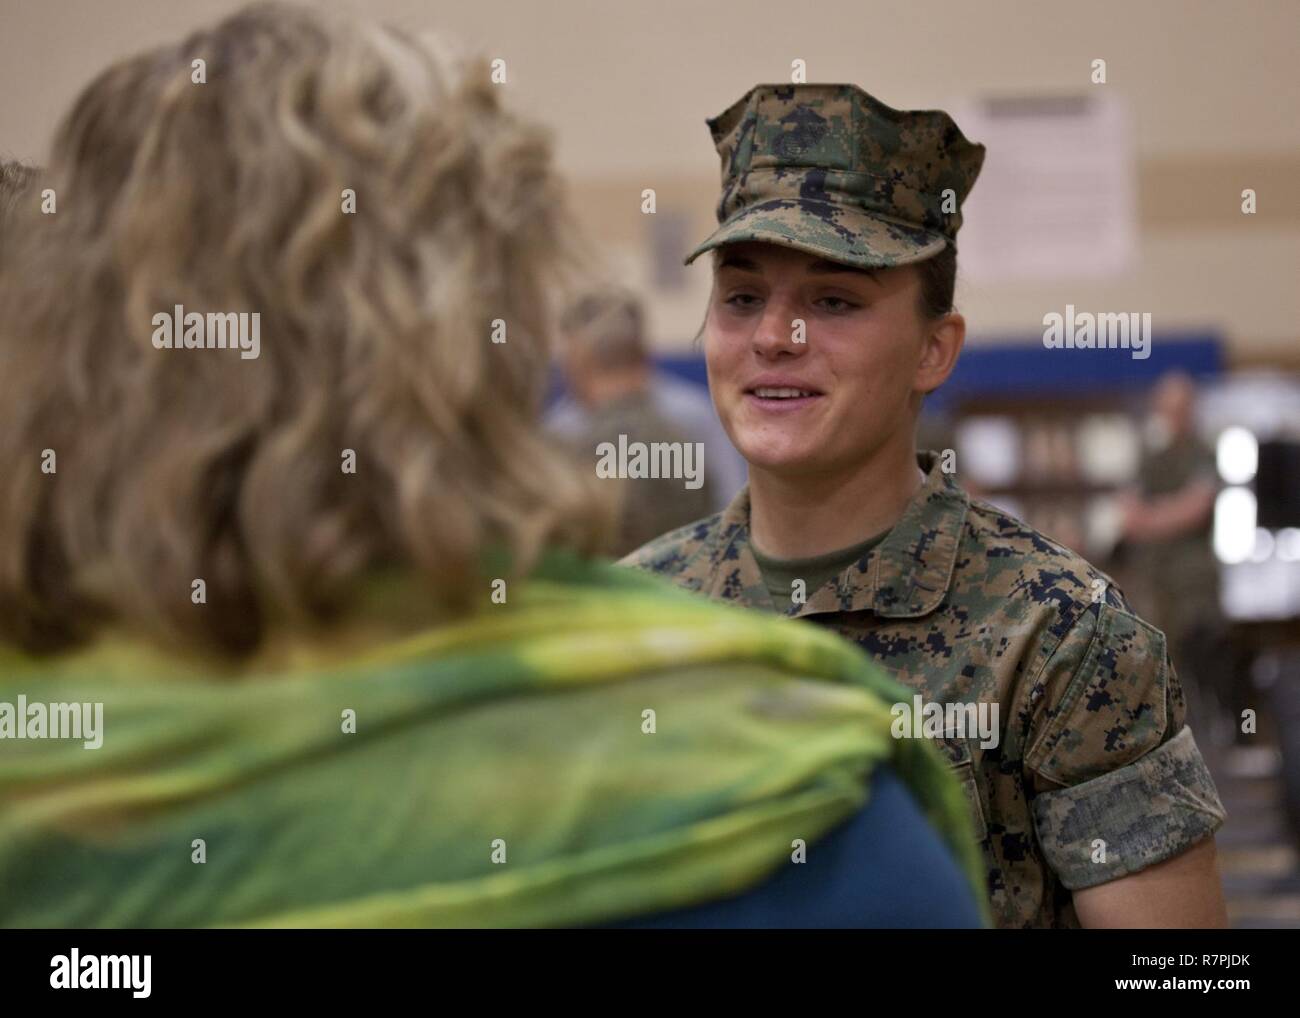 U.S. Marine Corps Pfc. Maria Daume, a mortarman assigned to Bravo Company, Infantry Training Battalion, School of Infantry-East, is congratulated after graduating from the Basic Mortarman course aboard Camp Geiger, N.C., March 23, 2017. The purpose of the Mortarman is to provide fire in support of maneuver elements using light, medium, and heavy mortars. Stock Photo